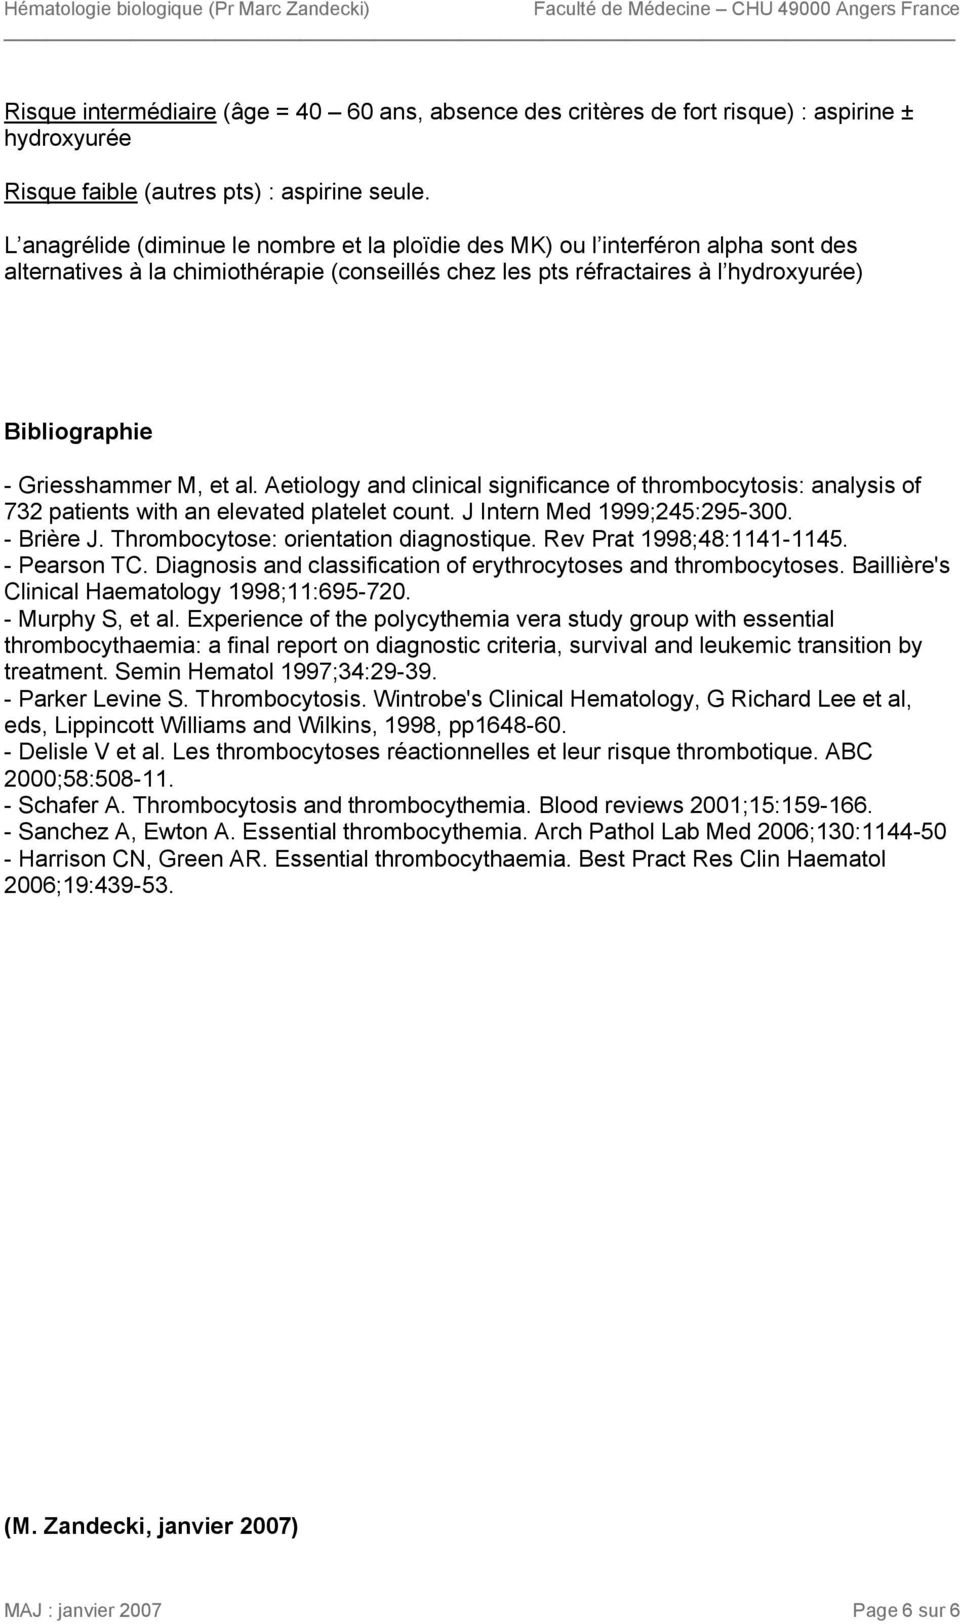 Griesshammer M, et al. Aetiology and clinical significance of thrombocytosis: analysis of 732 patients with an elevated platelet count. J Intern Med 1999;245:295-300. - Brière J.